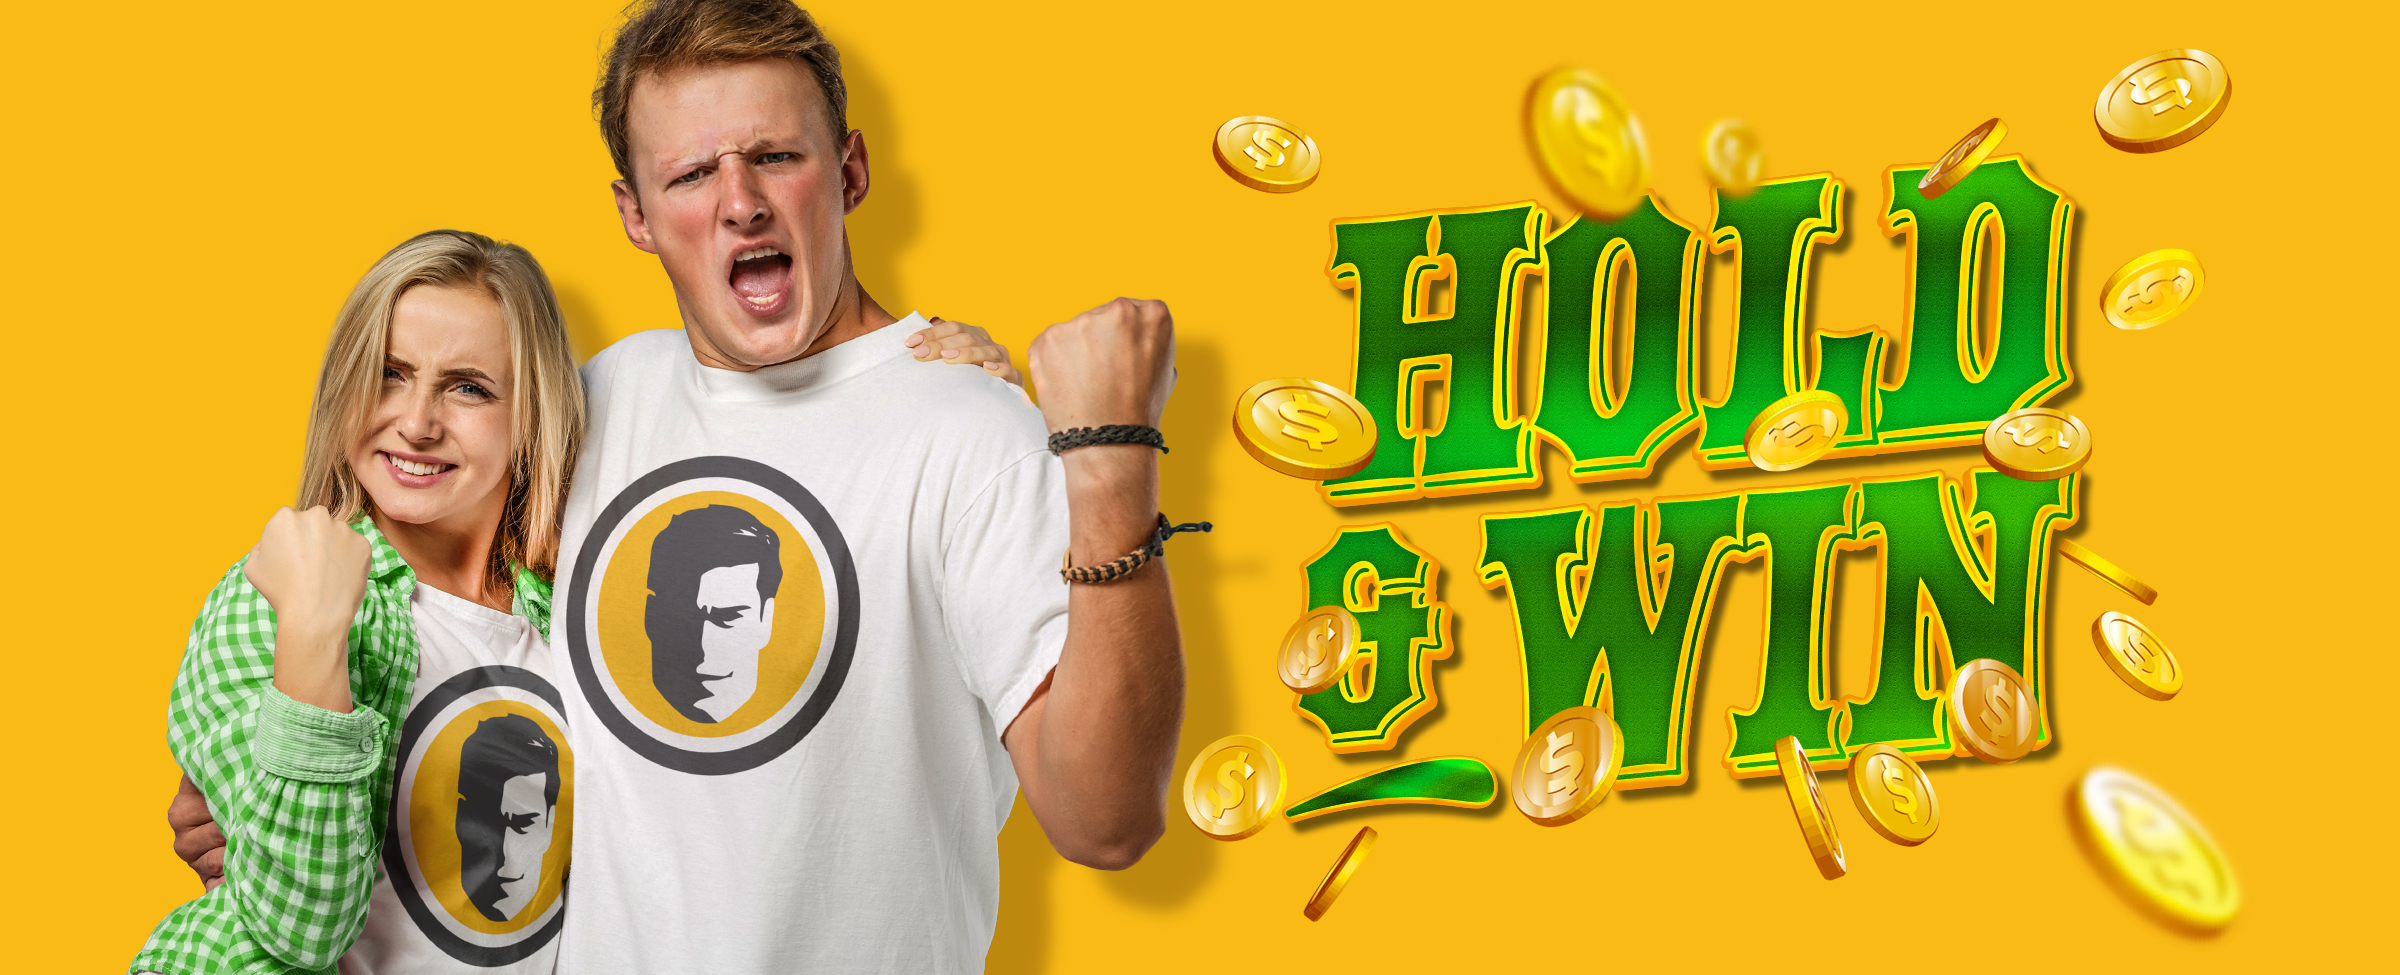 Hold and Win pokies are here. But what are they? Glad you asked! Let’s dive into this feature so you can get up and running fast with all the Hold and Win pokies at Joe Fortune.